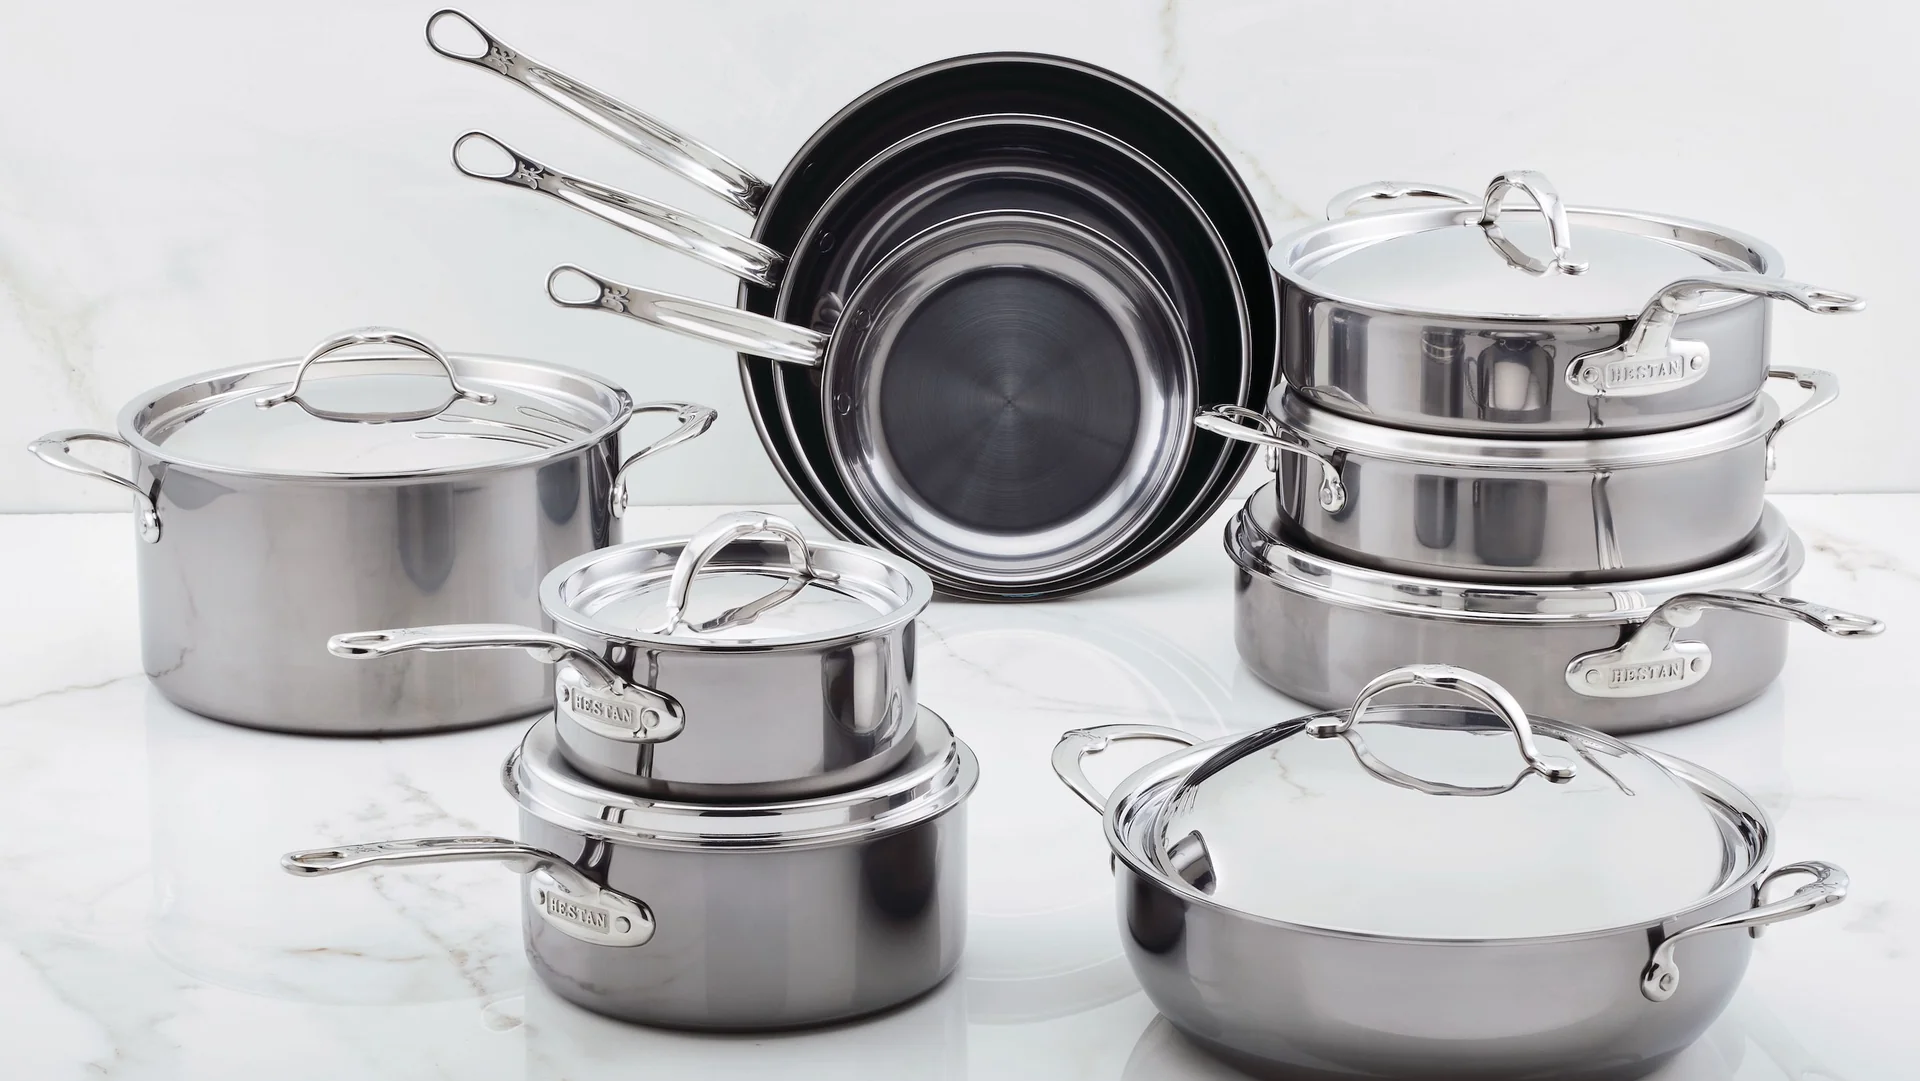 The 5 Remarkable Health Benefits of Cooking with Stainless Steel